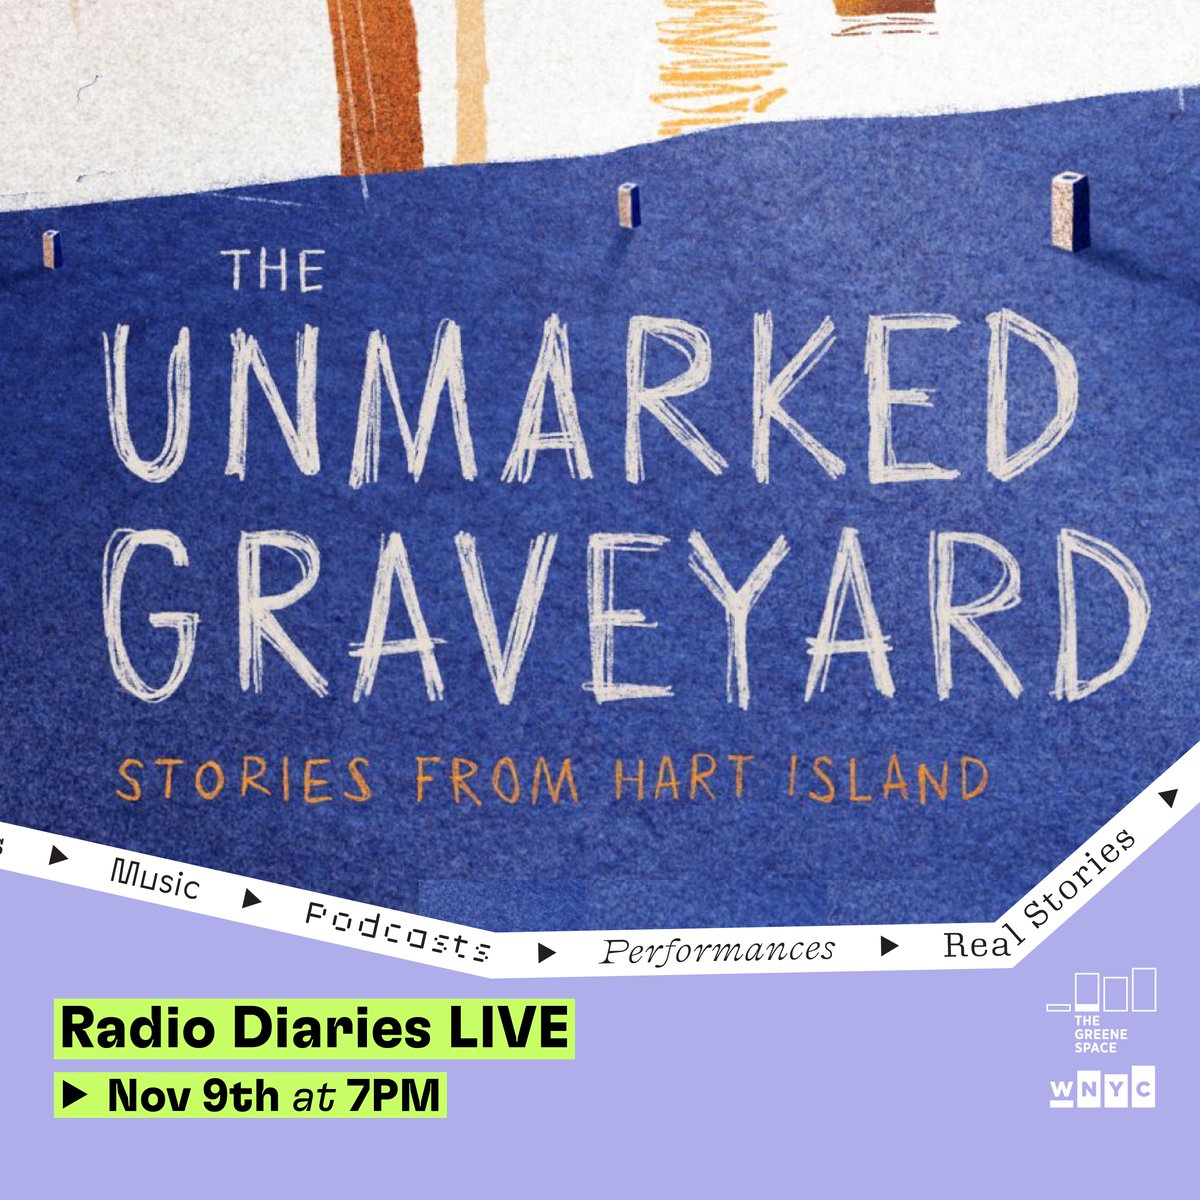 Join @WNYC host @kai_wright and @RadioDiaries as they present their new series, The Unmarked Graveyard, LIVE on November 9th! Uncover the mysteries of what happened to the people who were laid to rest on America's largest public cemetery. 🎫 Tickets: bit.ly/3FEgMPn